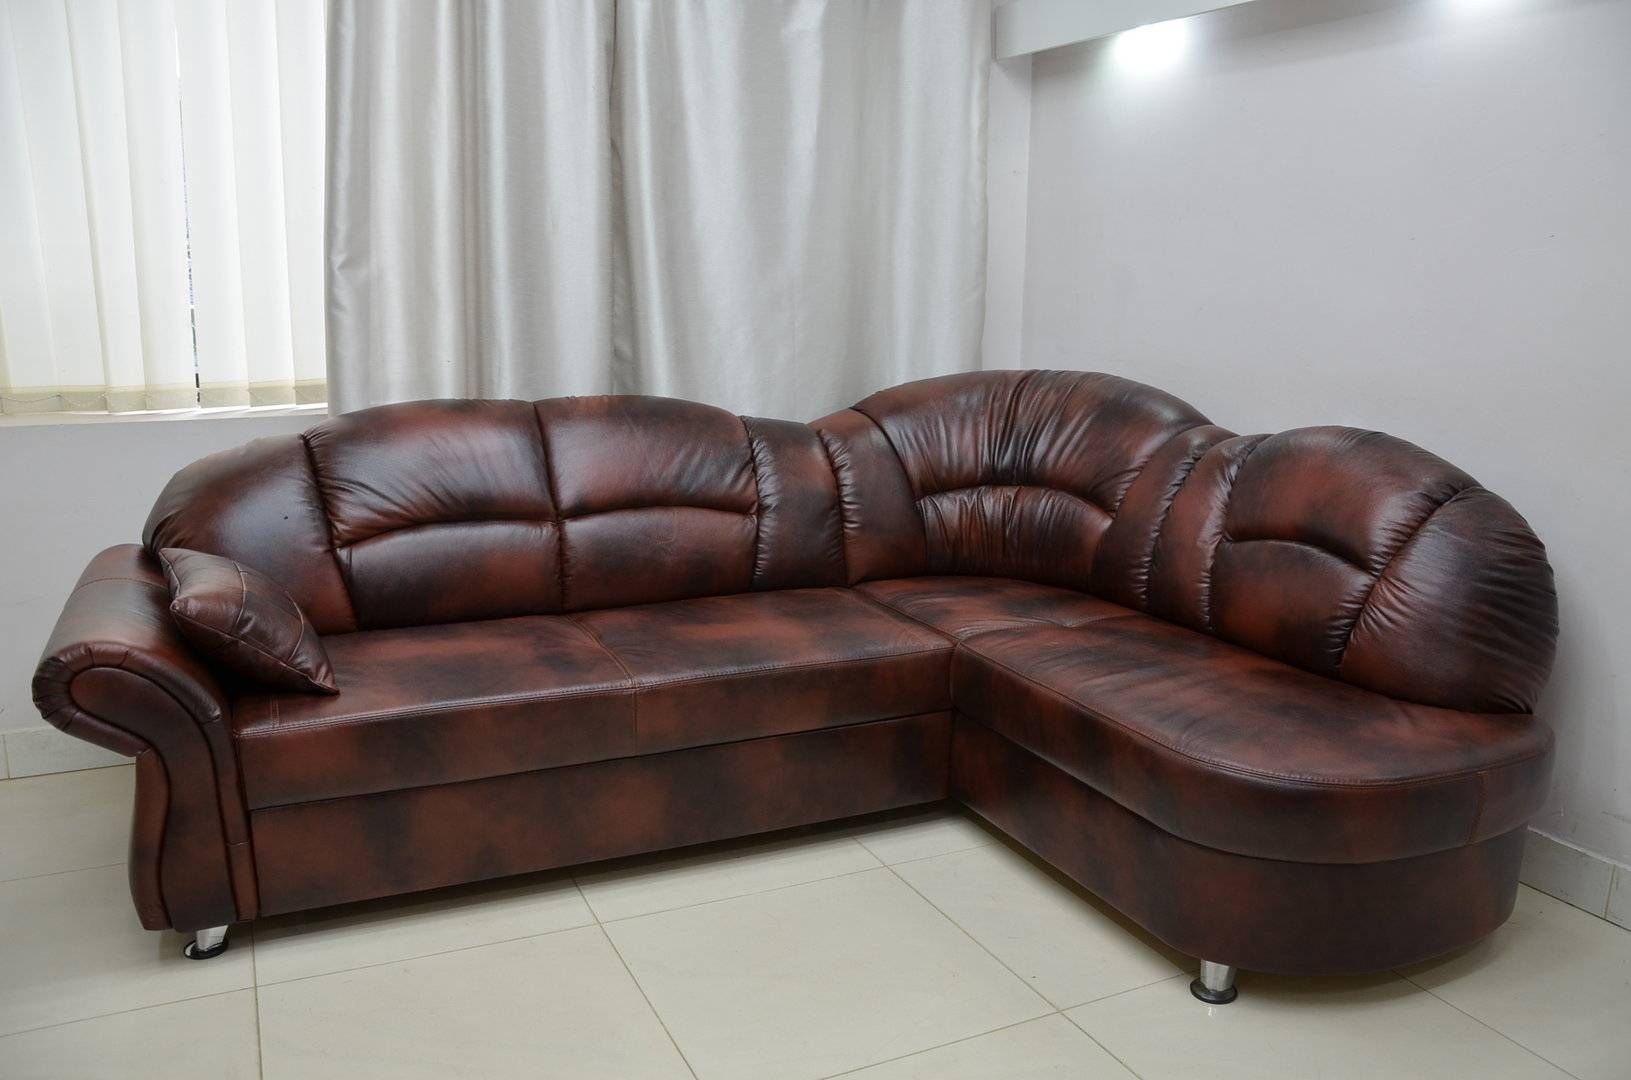 Real Leather Corner Sofa Bed Romero, Real Leather All Over Regarding Corner Sofa Leather (View 14 of 30)